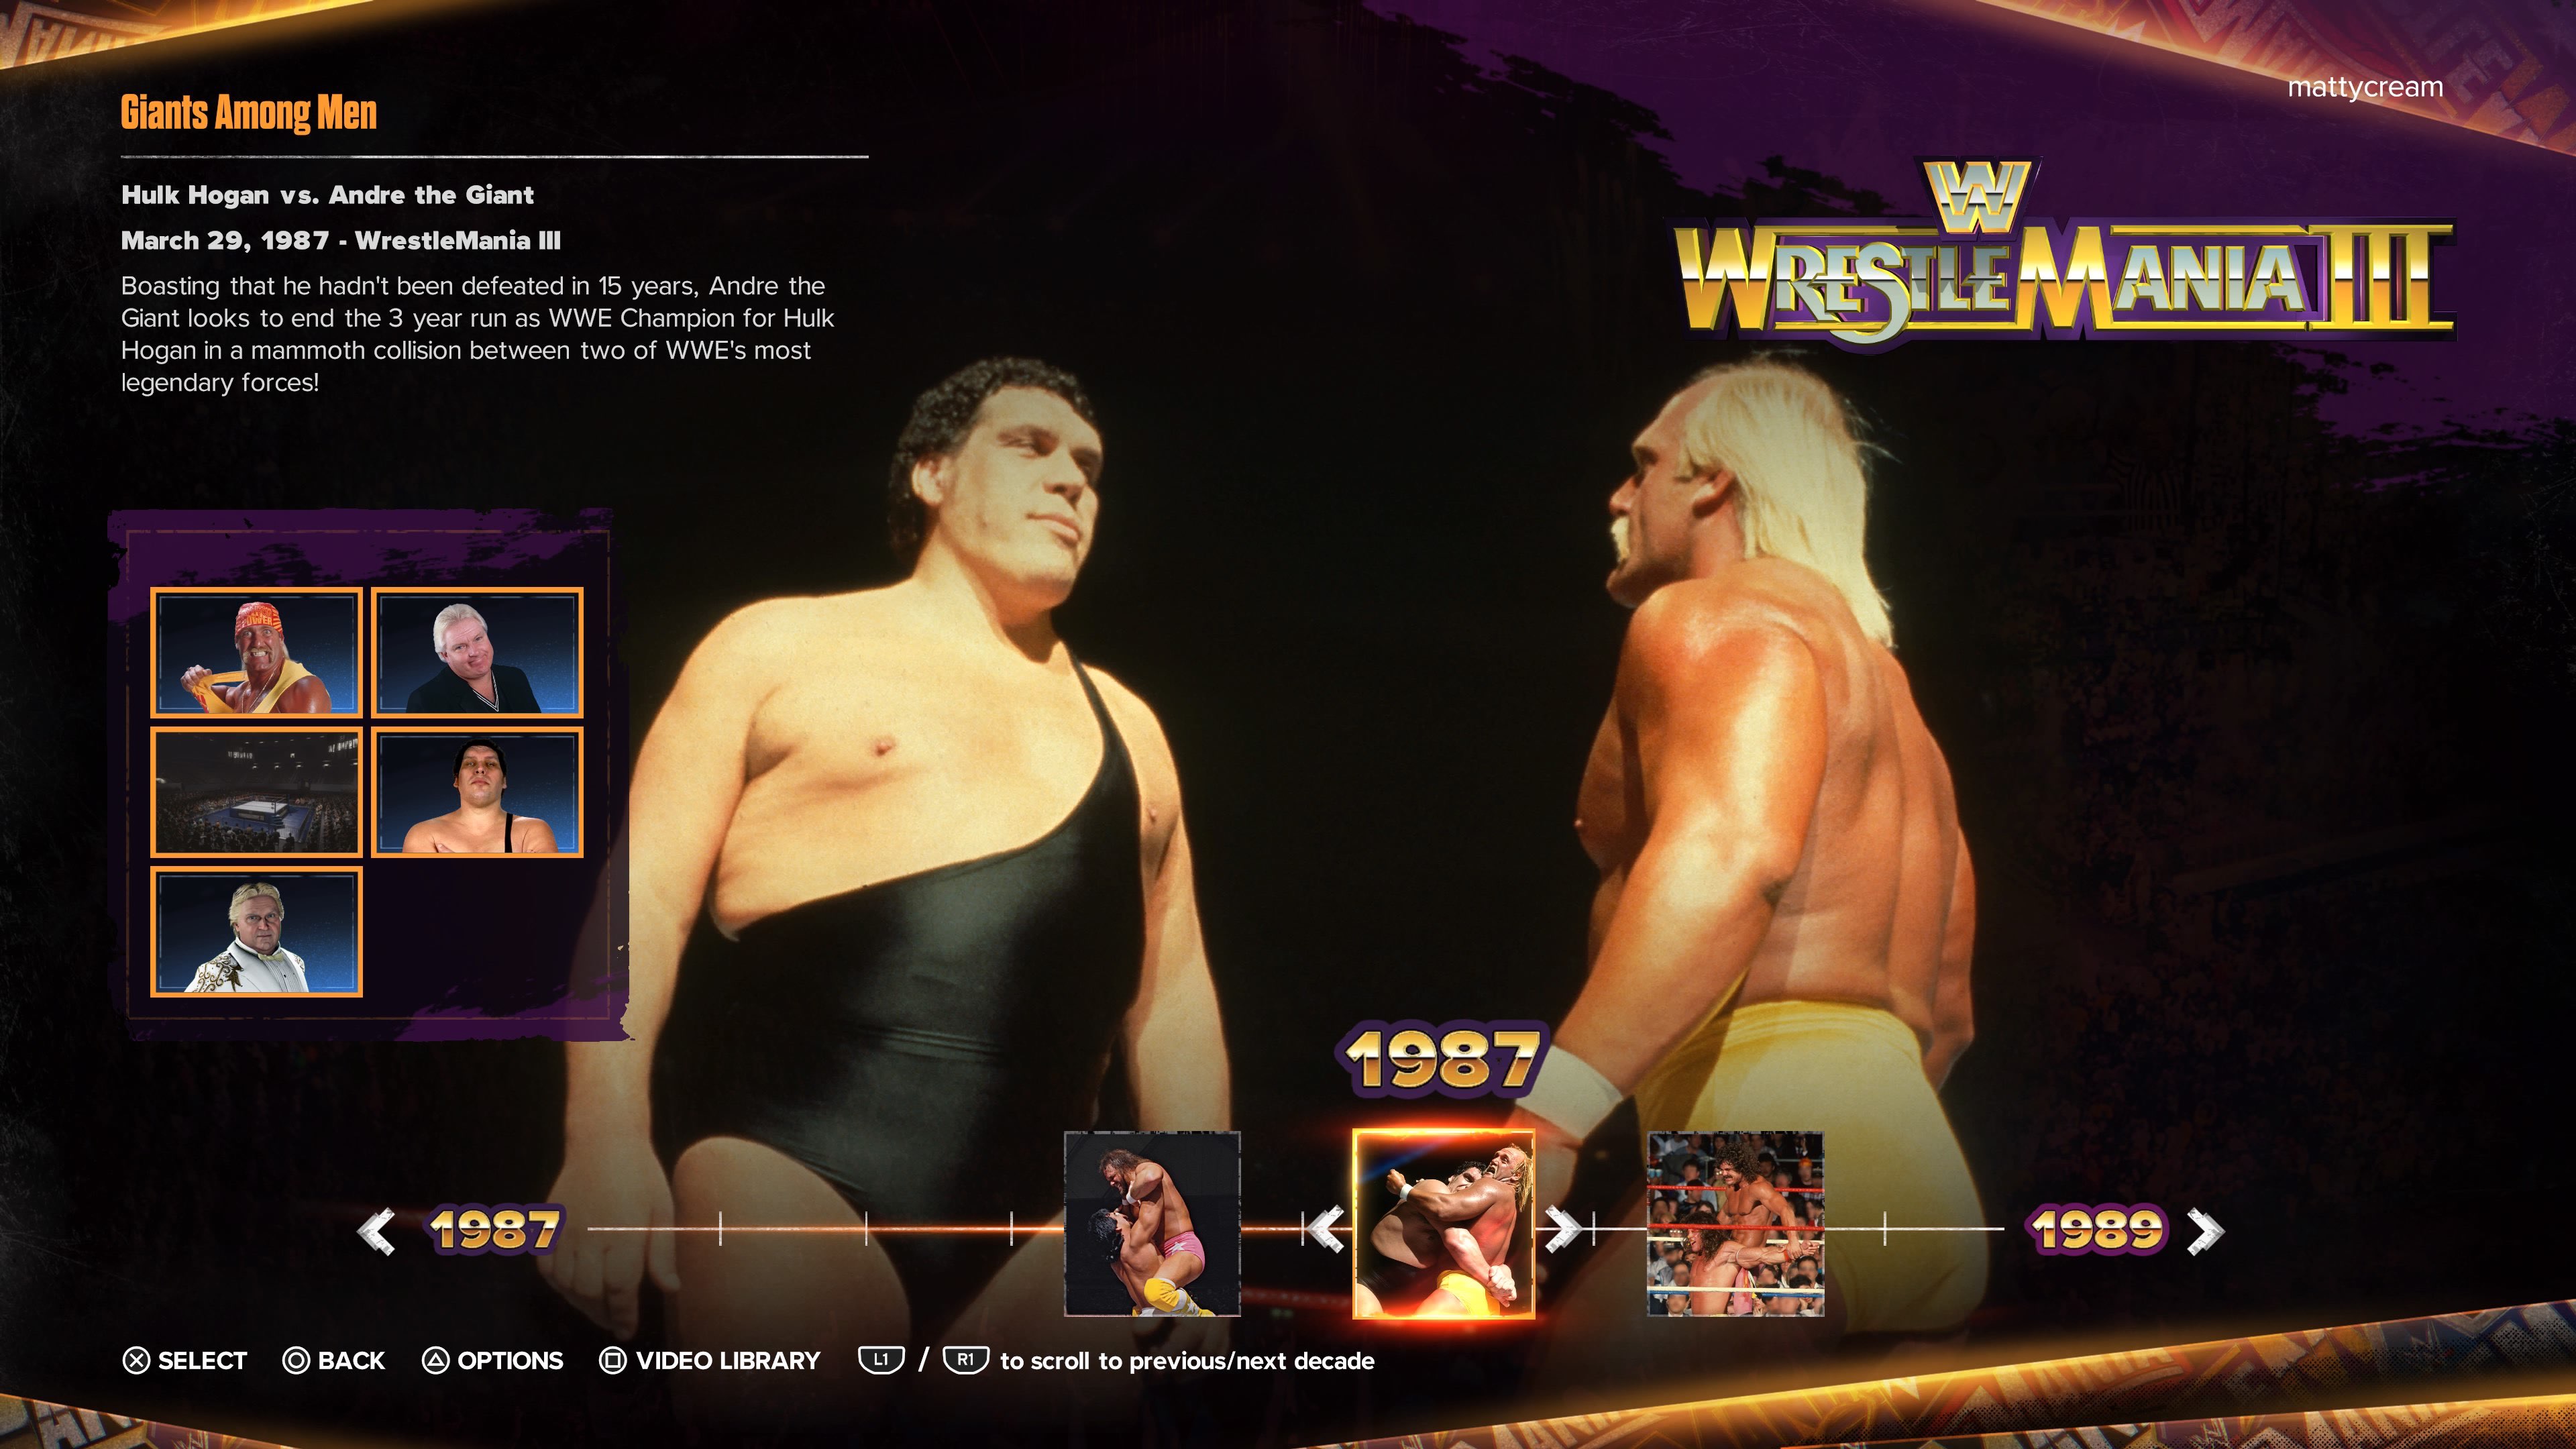 Andre The Giant and Hulk Hogan staring each other down.